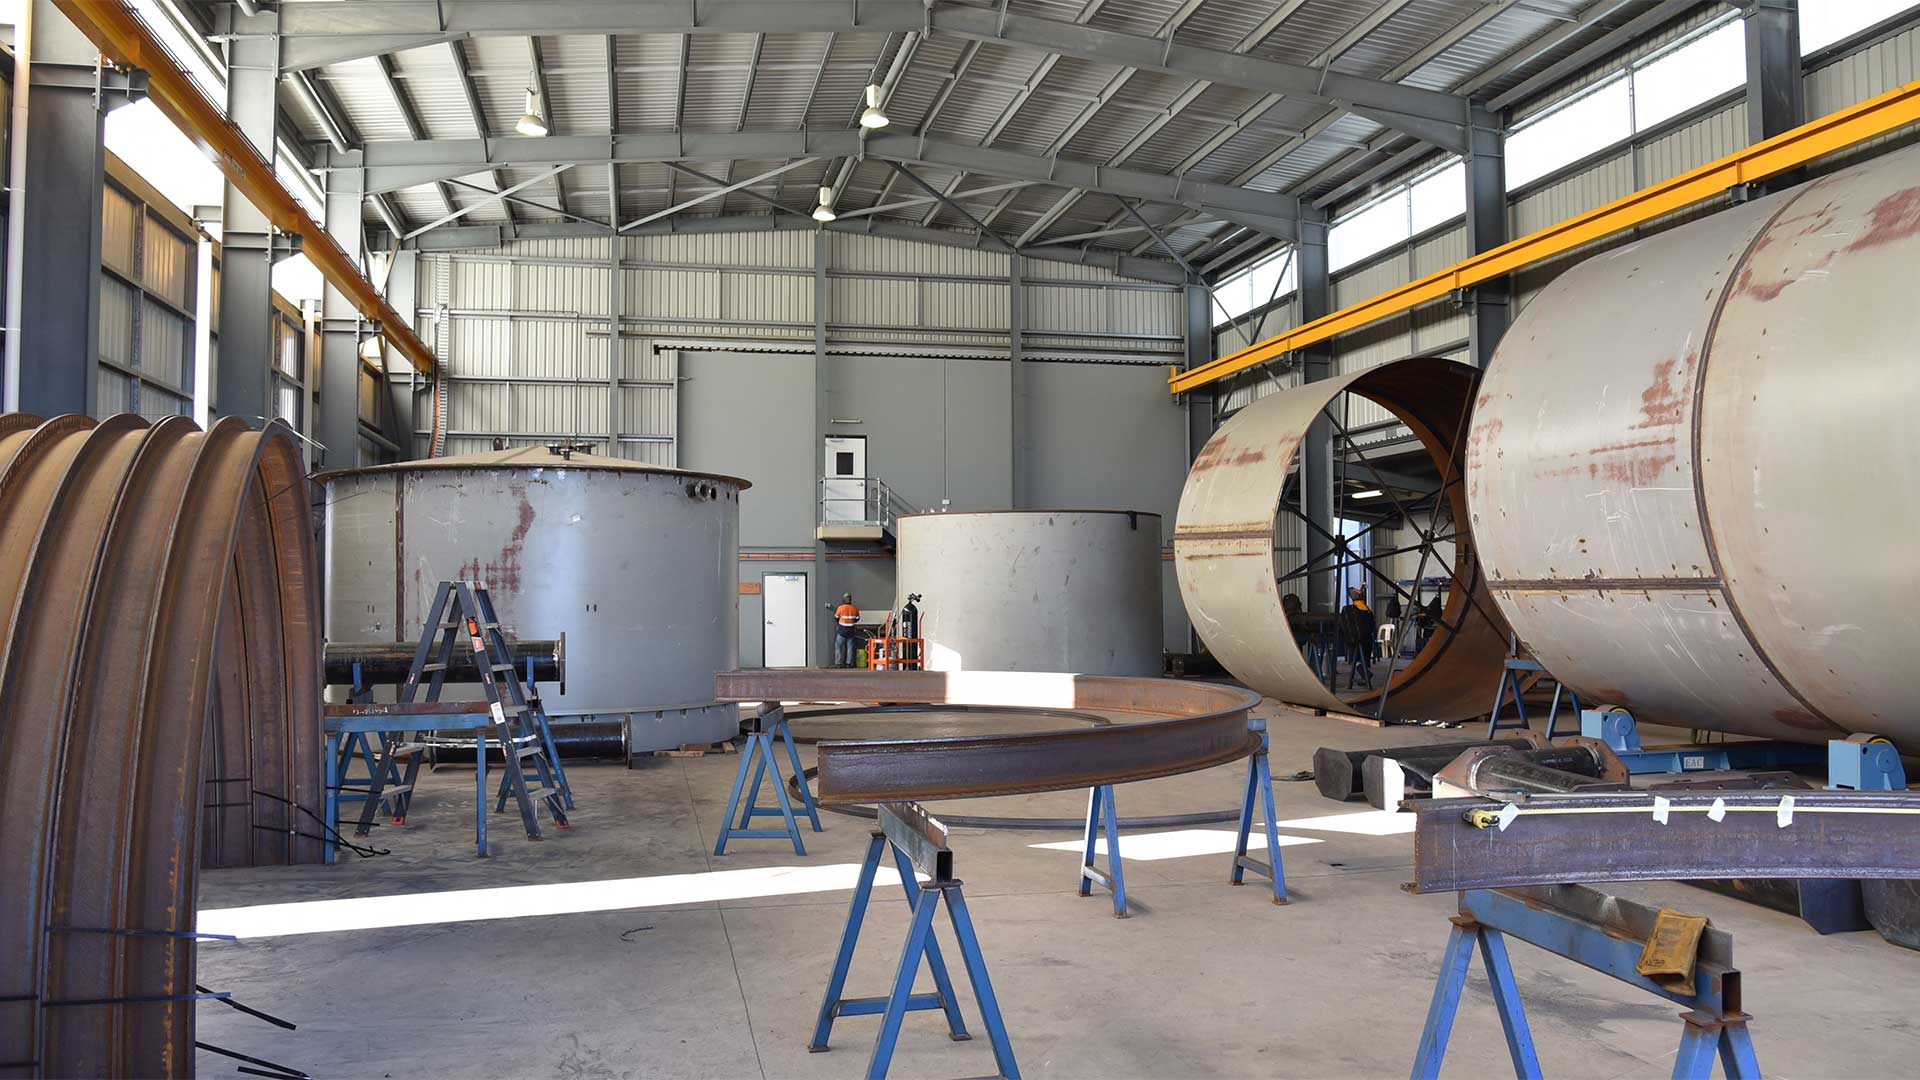 Metal fabrication of large fuel tanks for mining